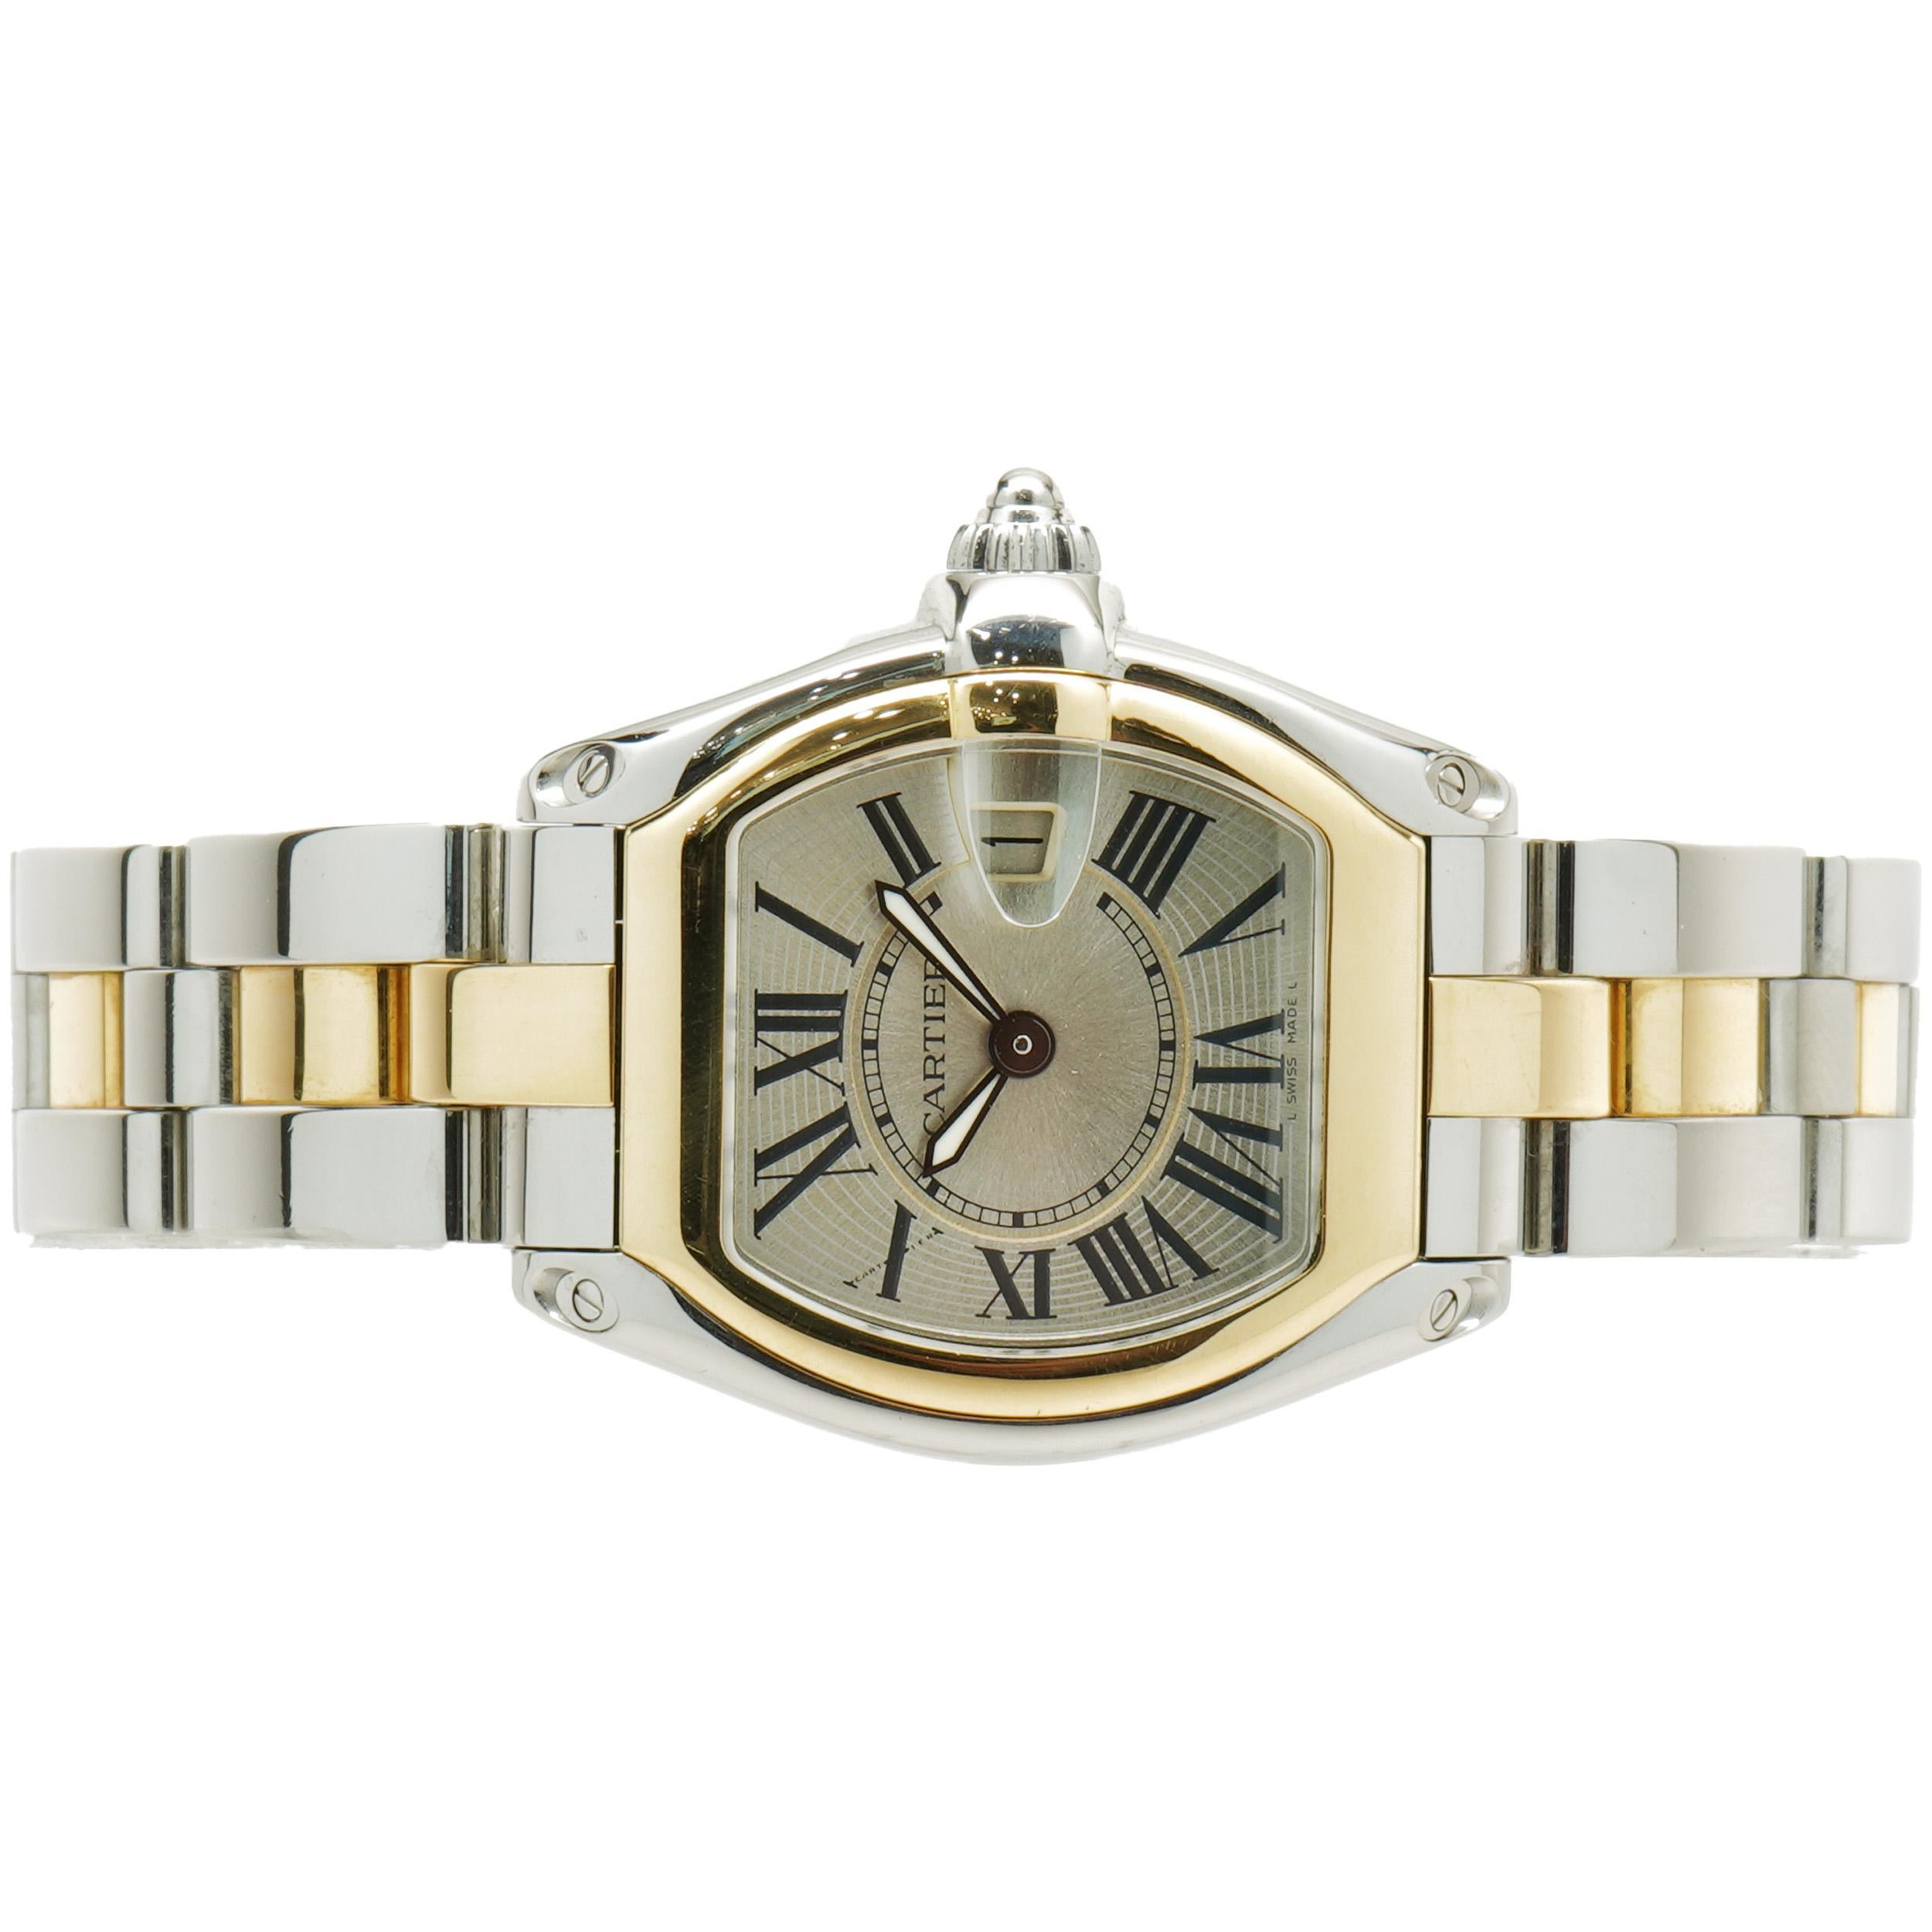 Movement: automatic
Function: hours, minutes, seconds, date
Case: 36 x 30mm stainless steel case, 18K yellow gold smooth bezel 
Dial: white roman dial
Band: Cartier stainless steel & 18K yellow gold roadster link bracelet, integrated clasp
Serial #: